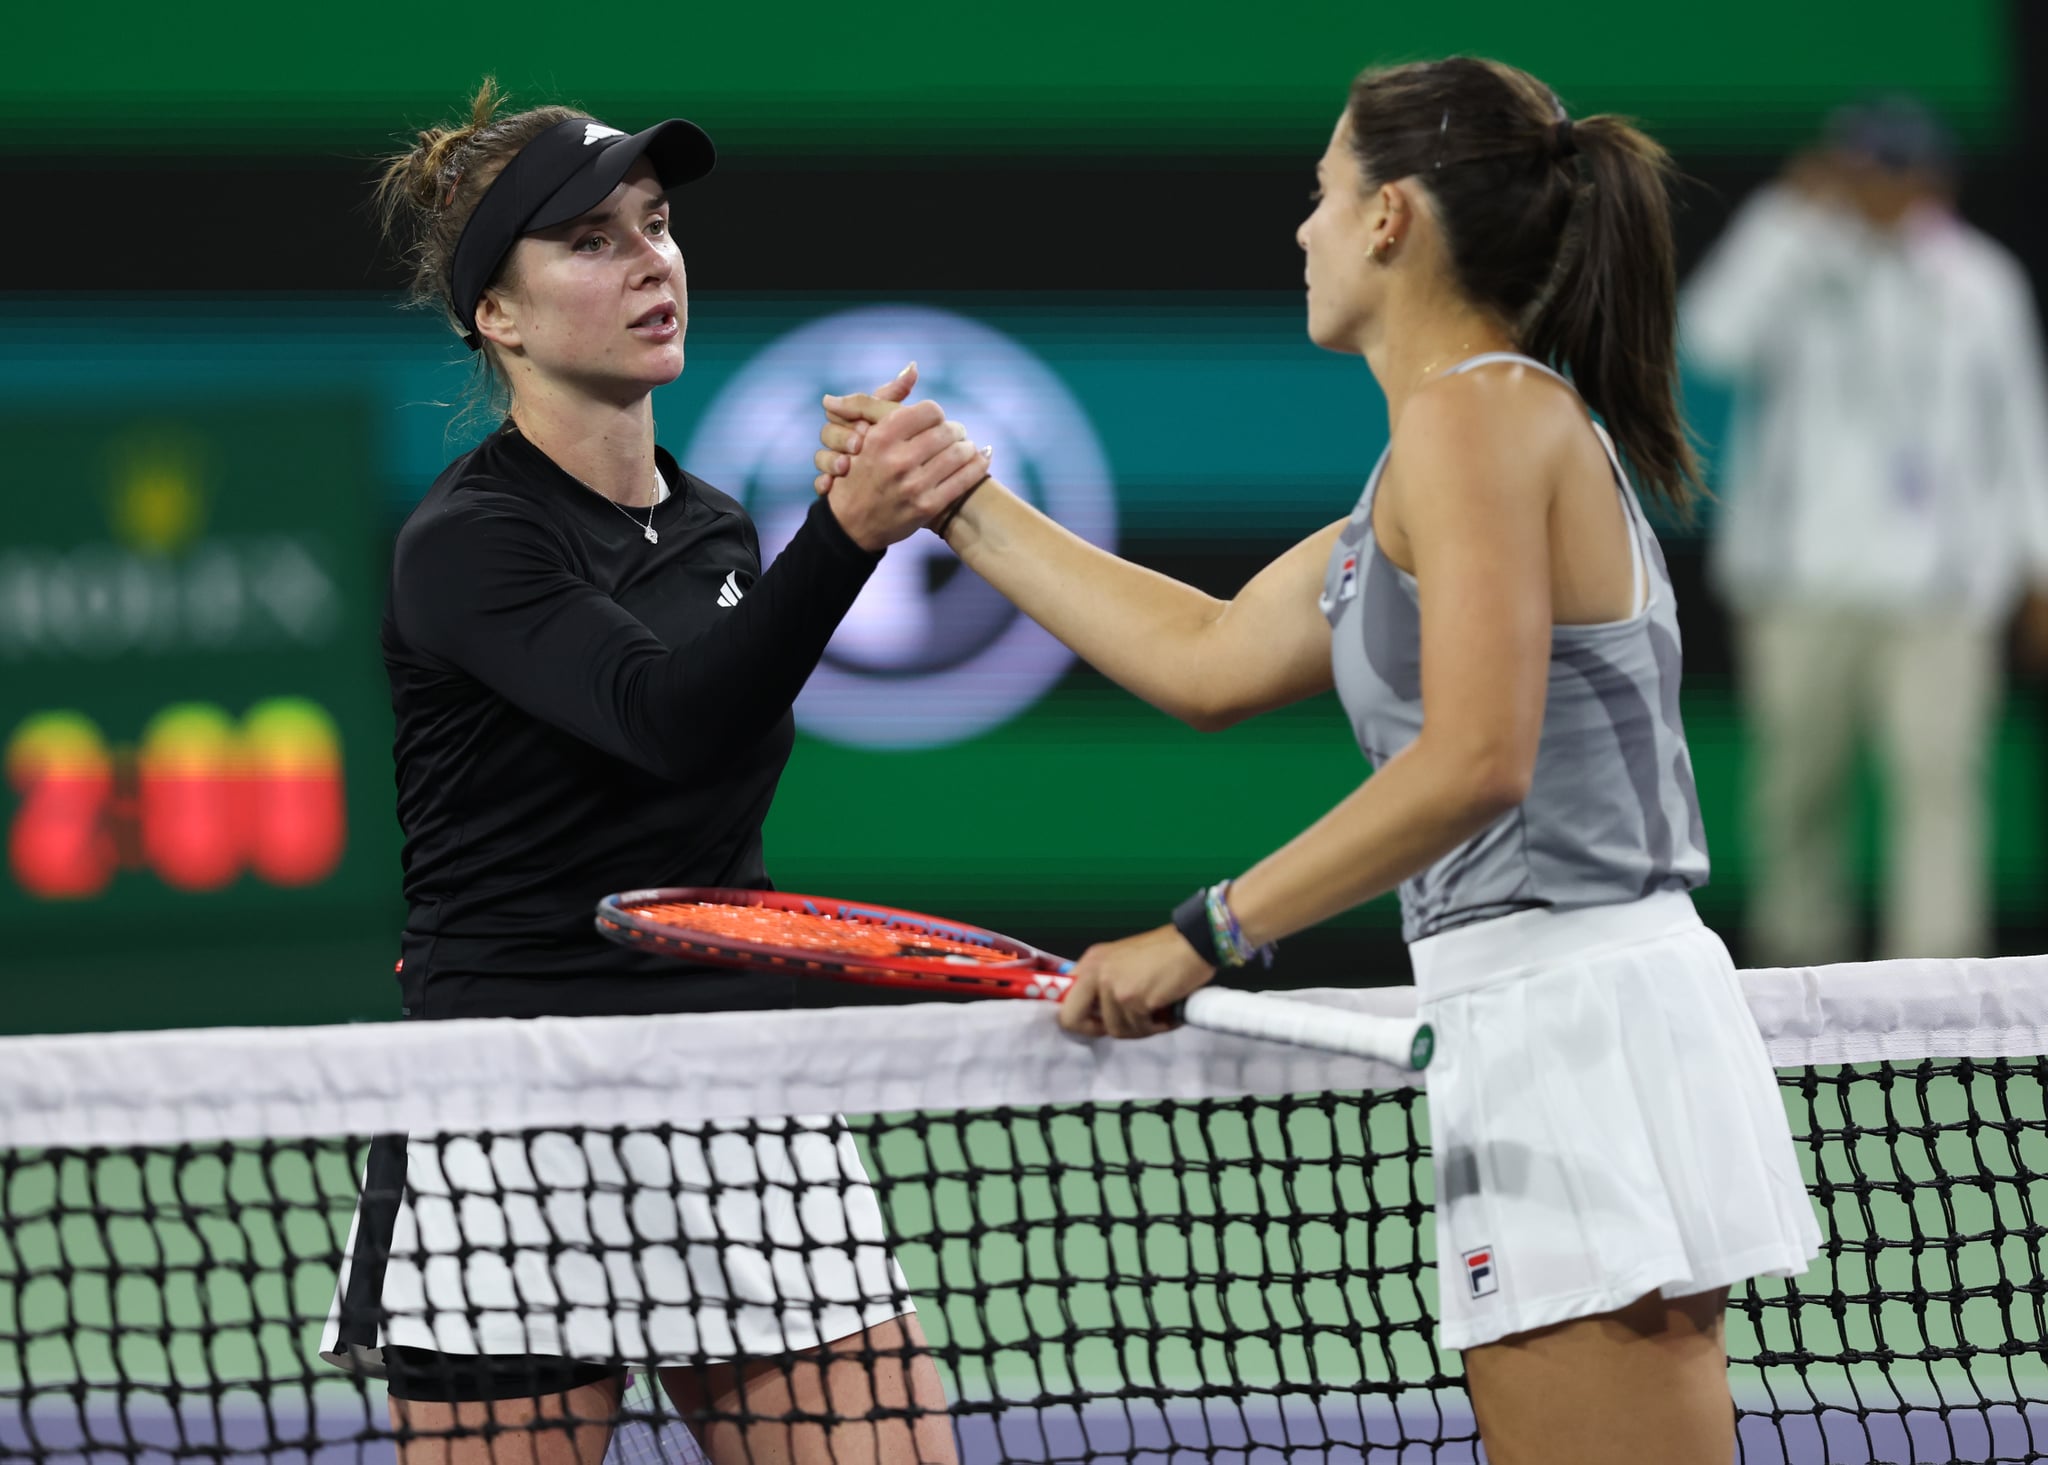 INDIAN WELLS, CALIFORNIA - MARCH 11:  Emma Navarro of the United States shakes hands at the net after her three set victory against Elina Svitolina of the Ukraine in their third round match during the BNP Paribas Open at Indian Wells Tennis Garden on March 11, 2024 in Indian Wells, California. (Photo by Clive Brunskill/Getty Images)